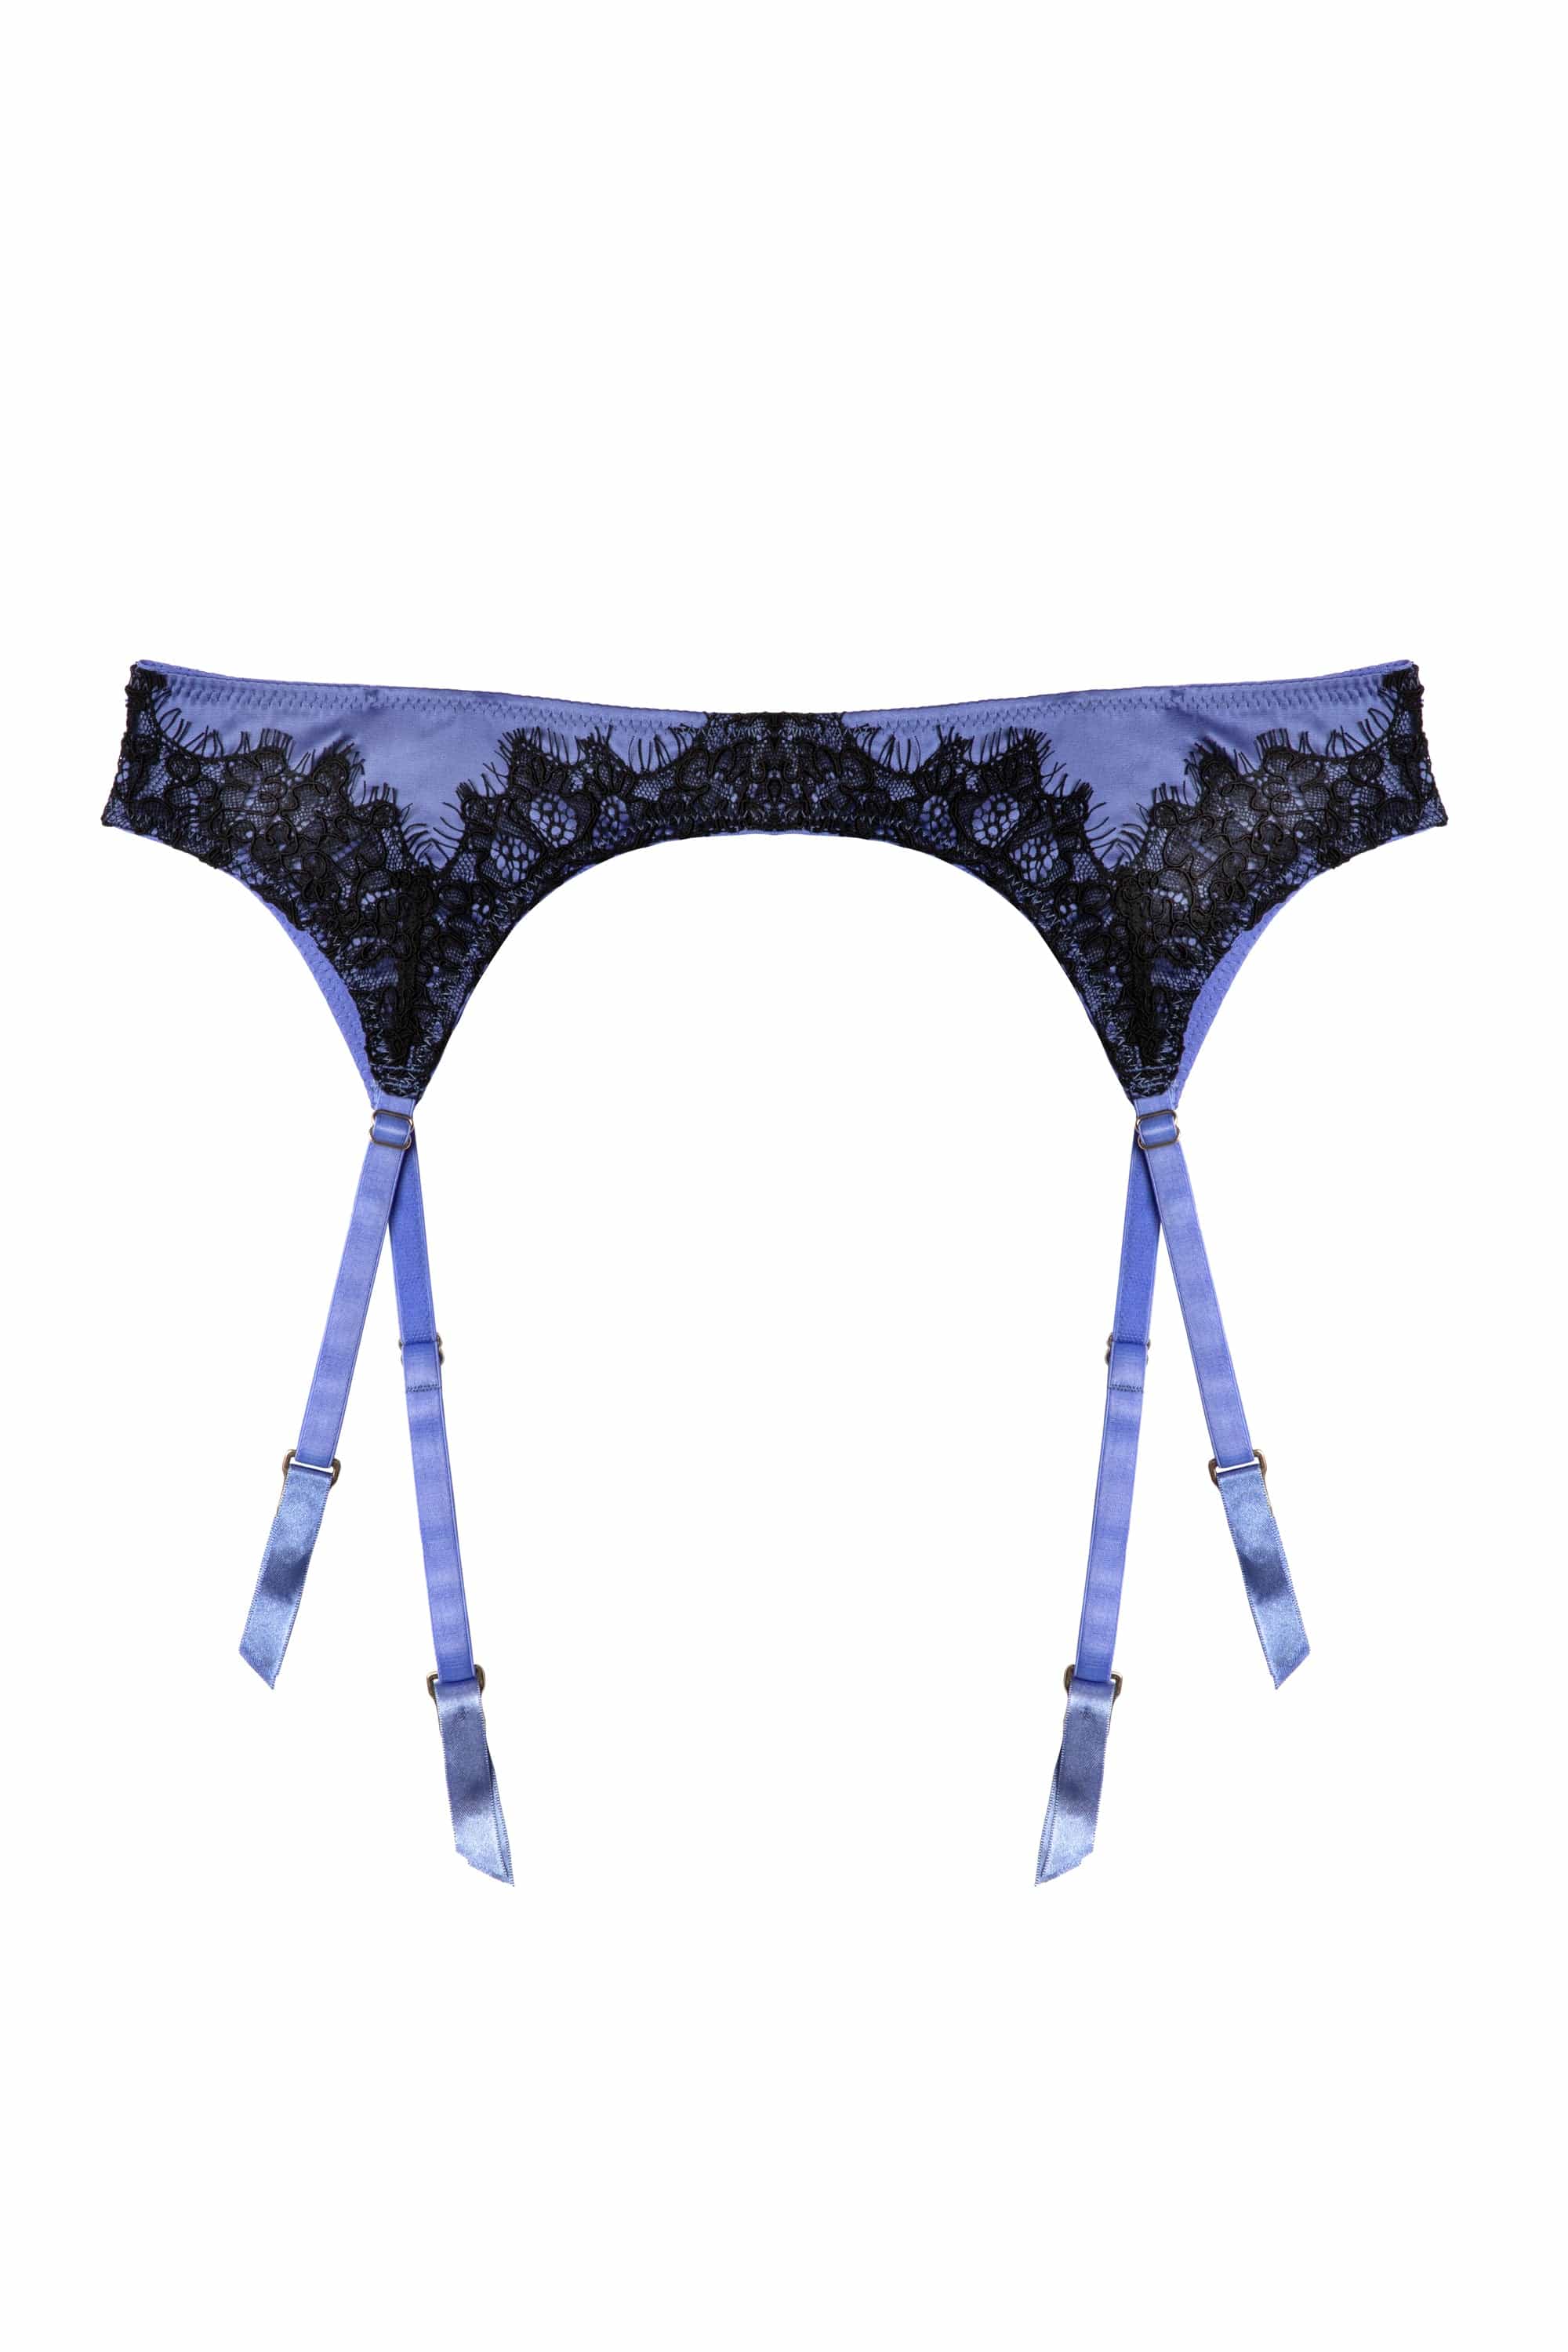 Stevie Lilac and Black Lace Suspender – Playful Promises USA